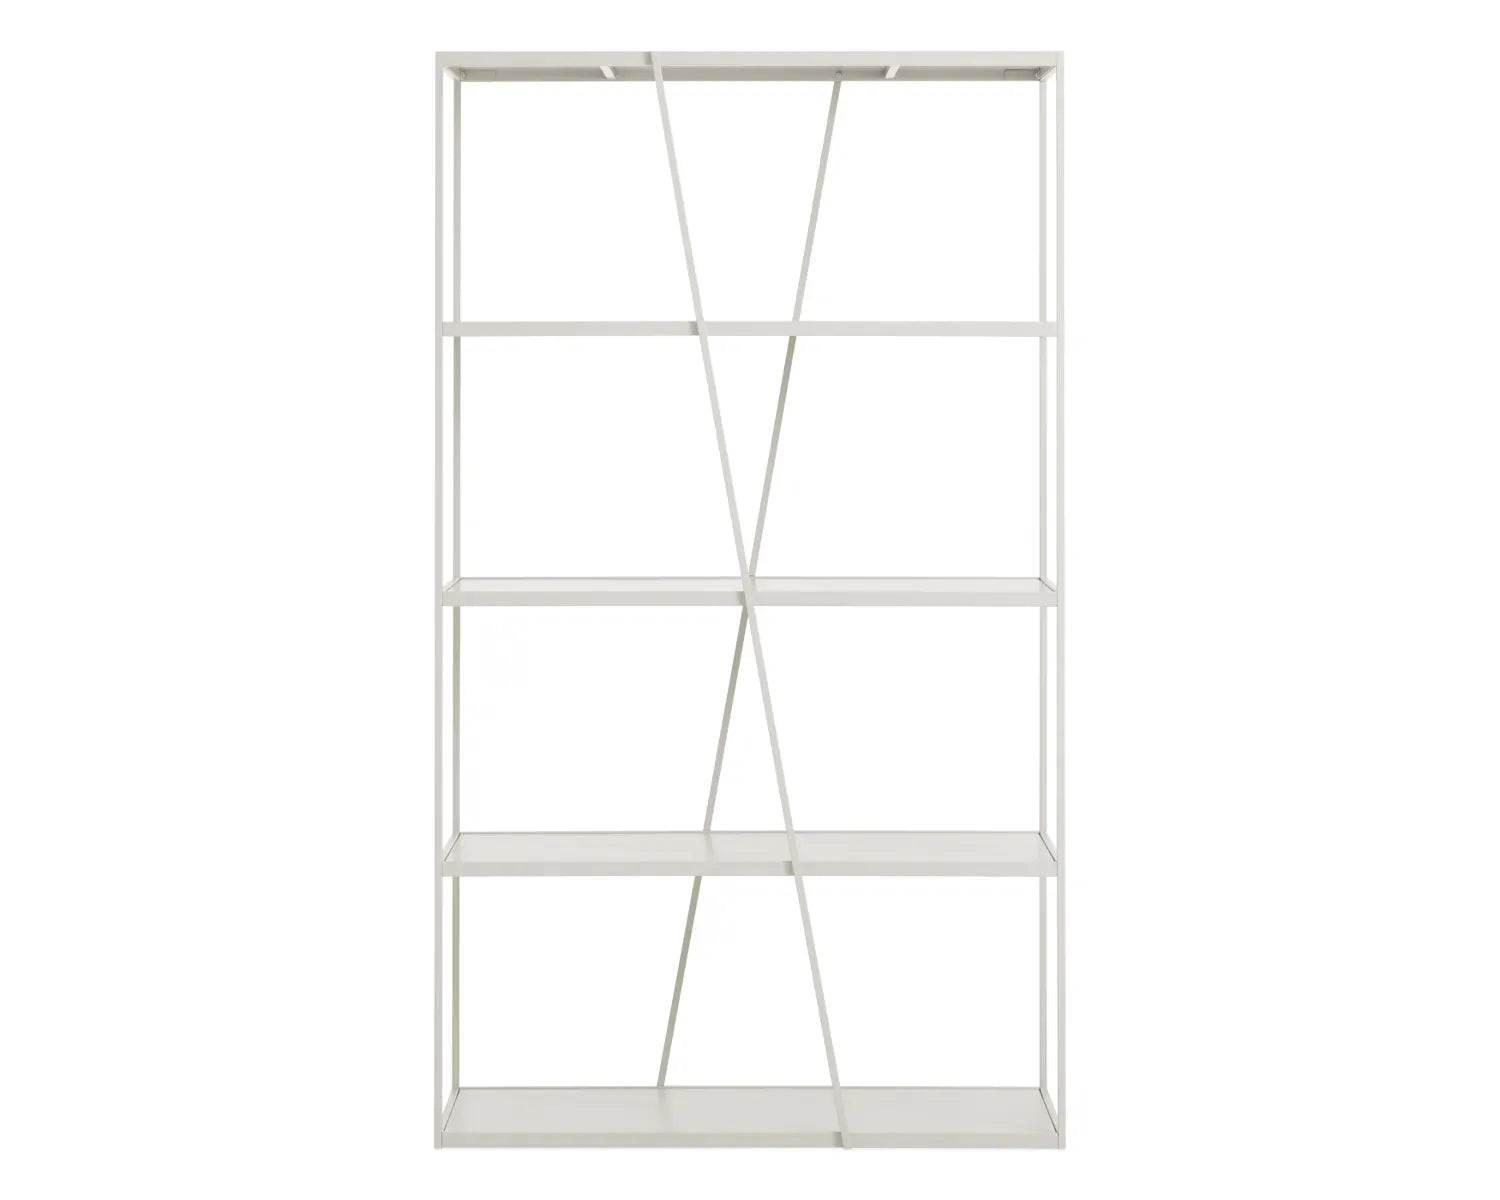 NeedWant Narrow Shelving [Putty] Floor Model Only